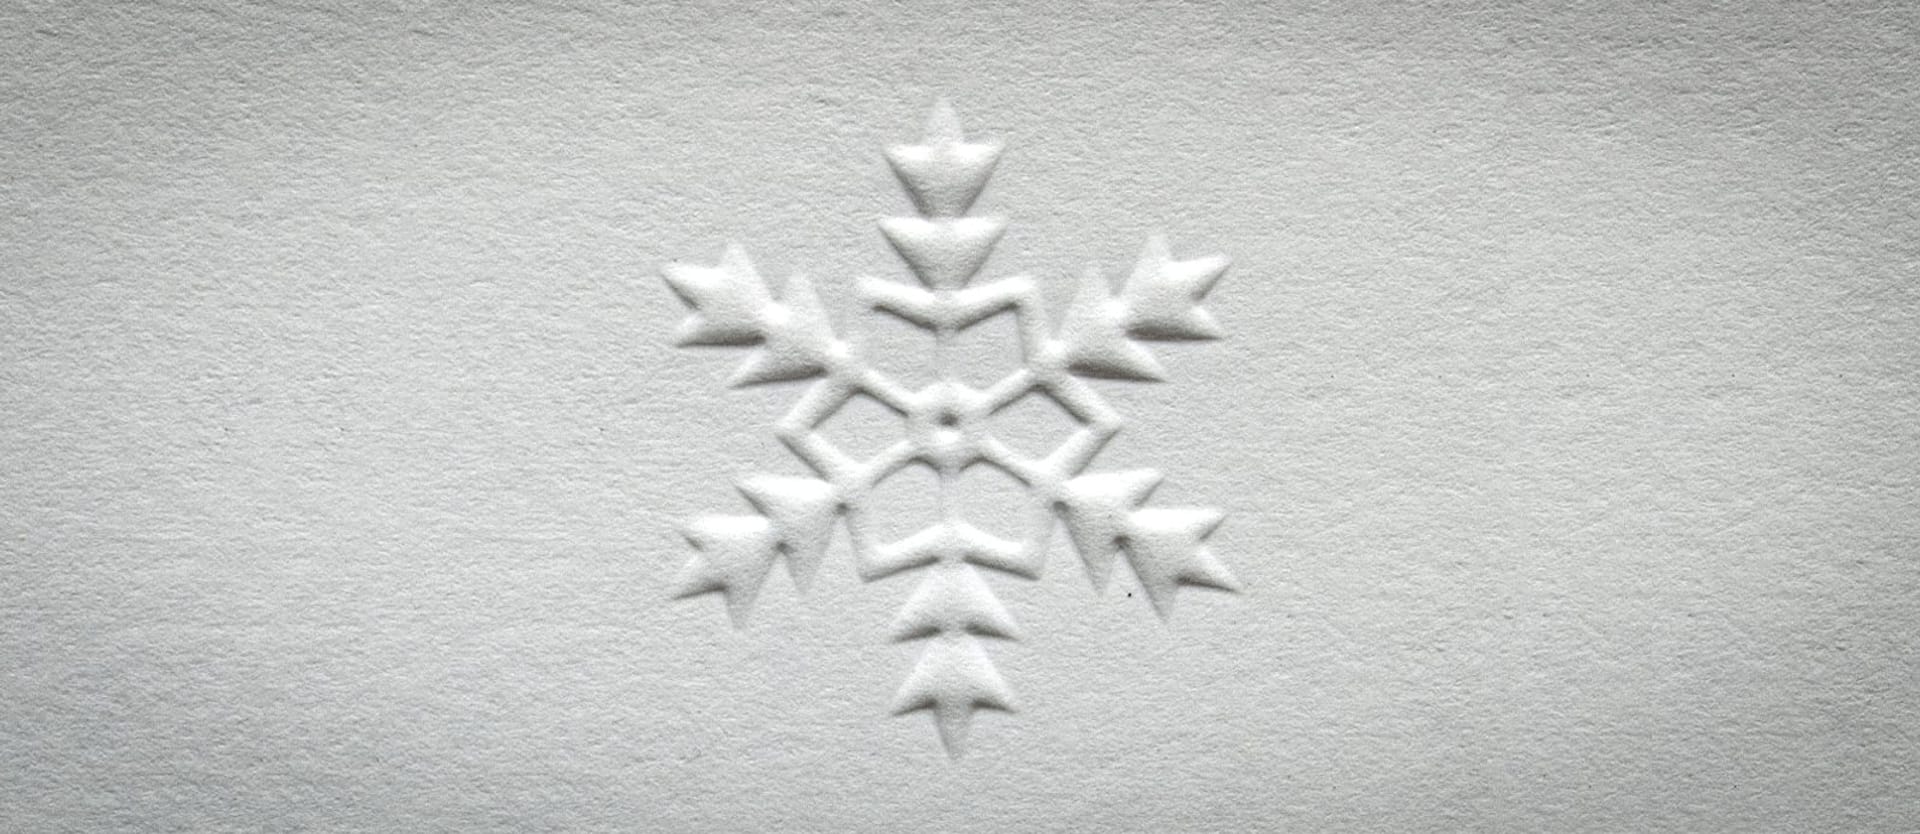 Did you know: Interesting facts about snowflakes, The Learning Key